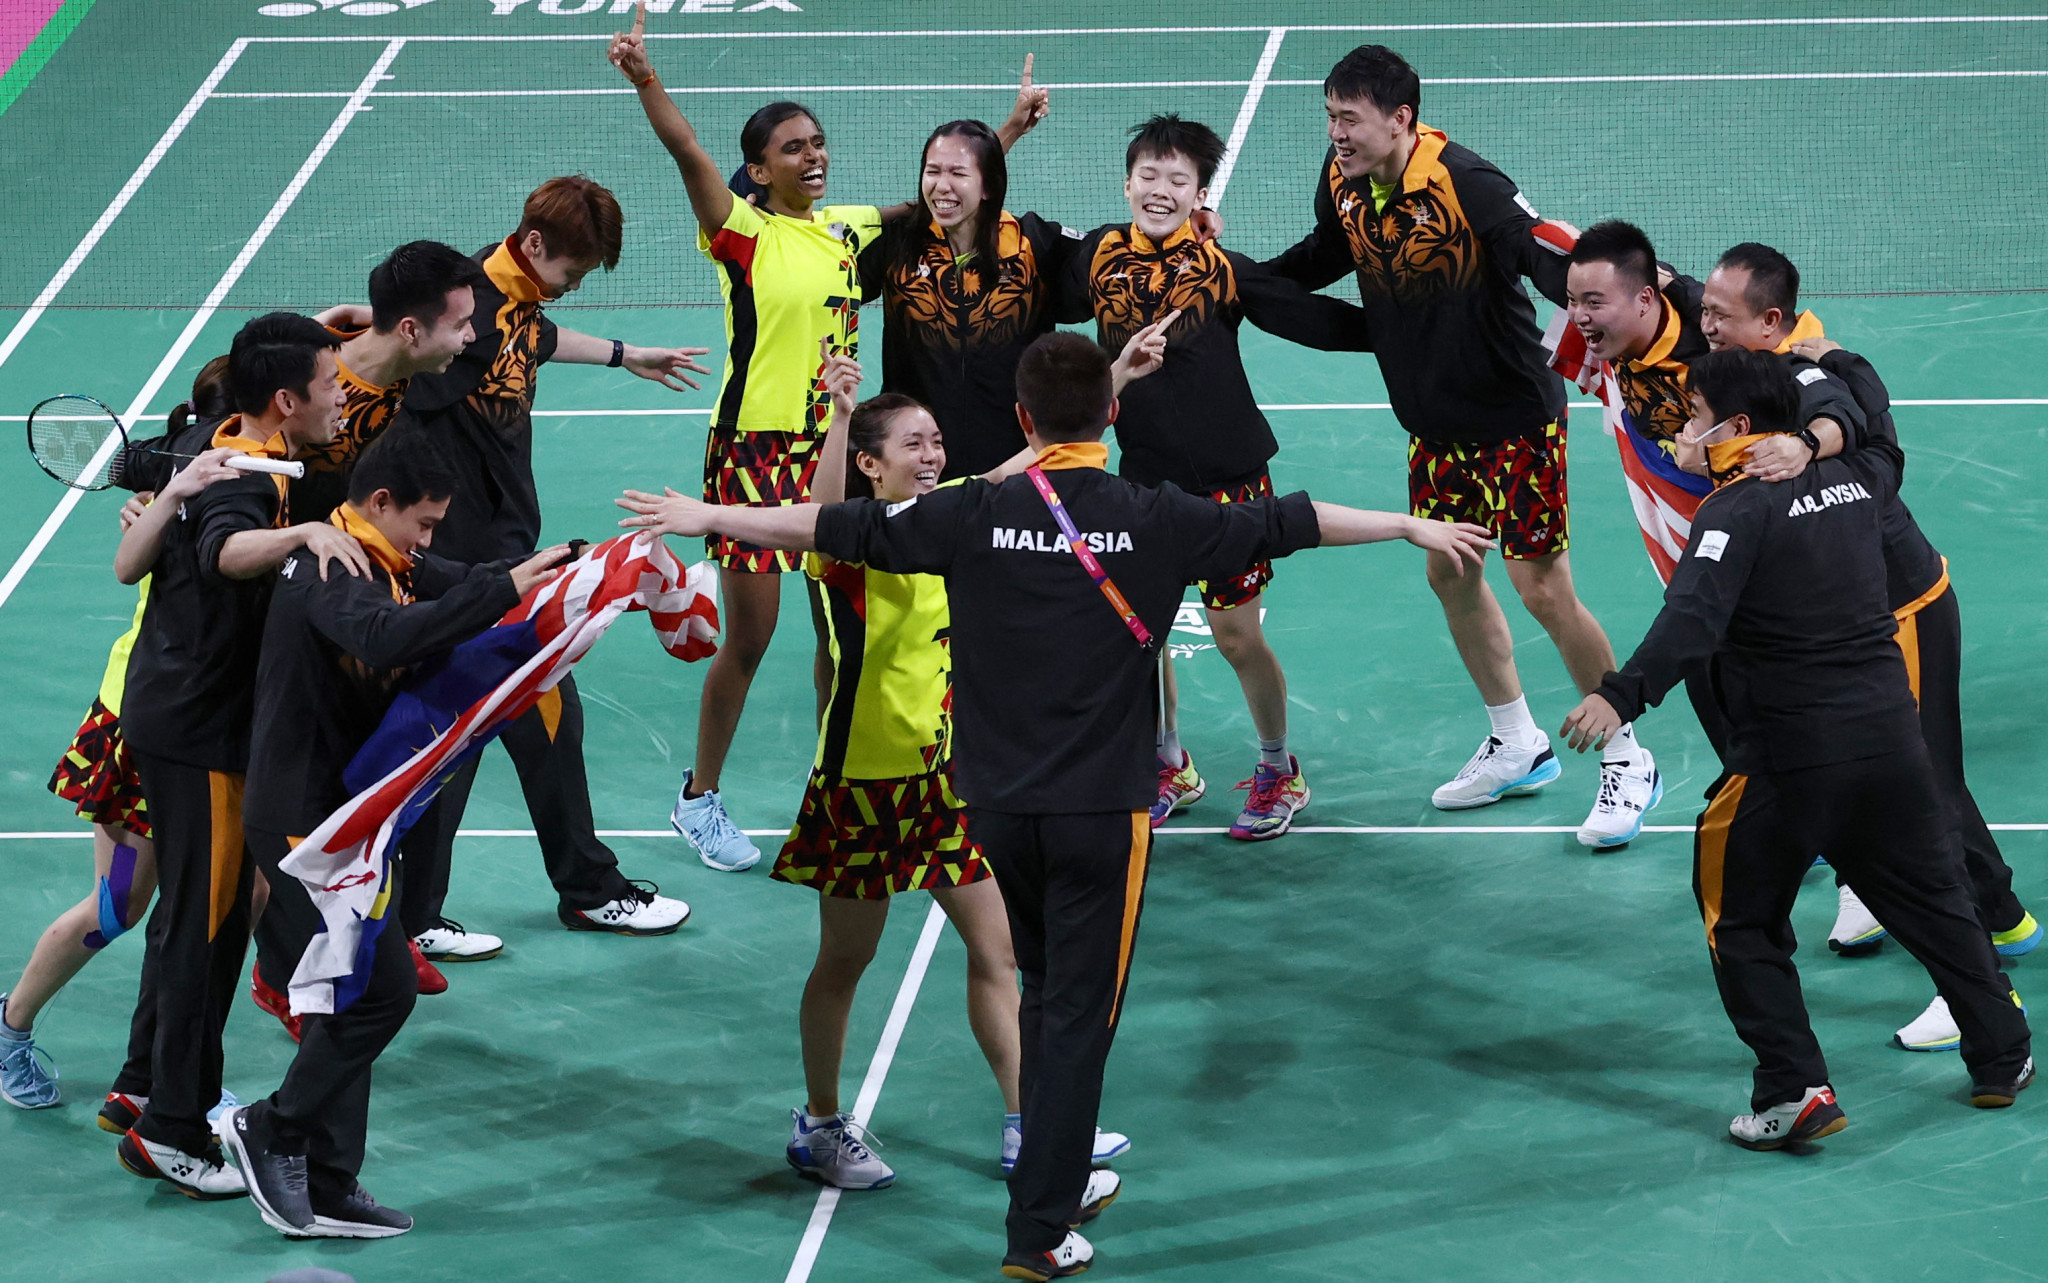 Malaysia are the defending Badminton Asia mixed team champions and also won gold in the event at the Birmingham 2022 Commonwealth Games ©Getty Images